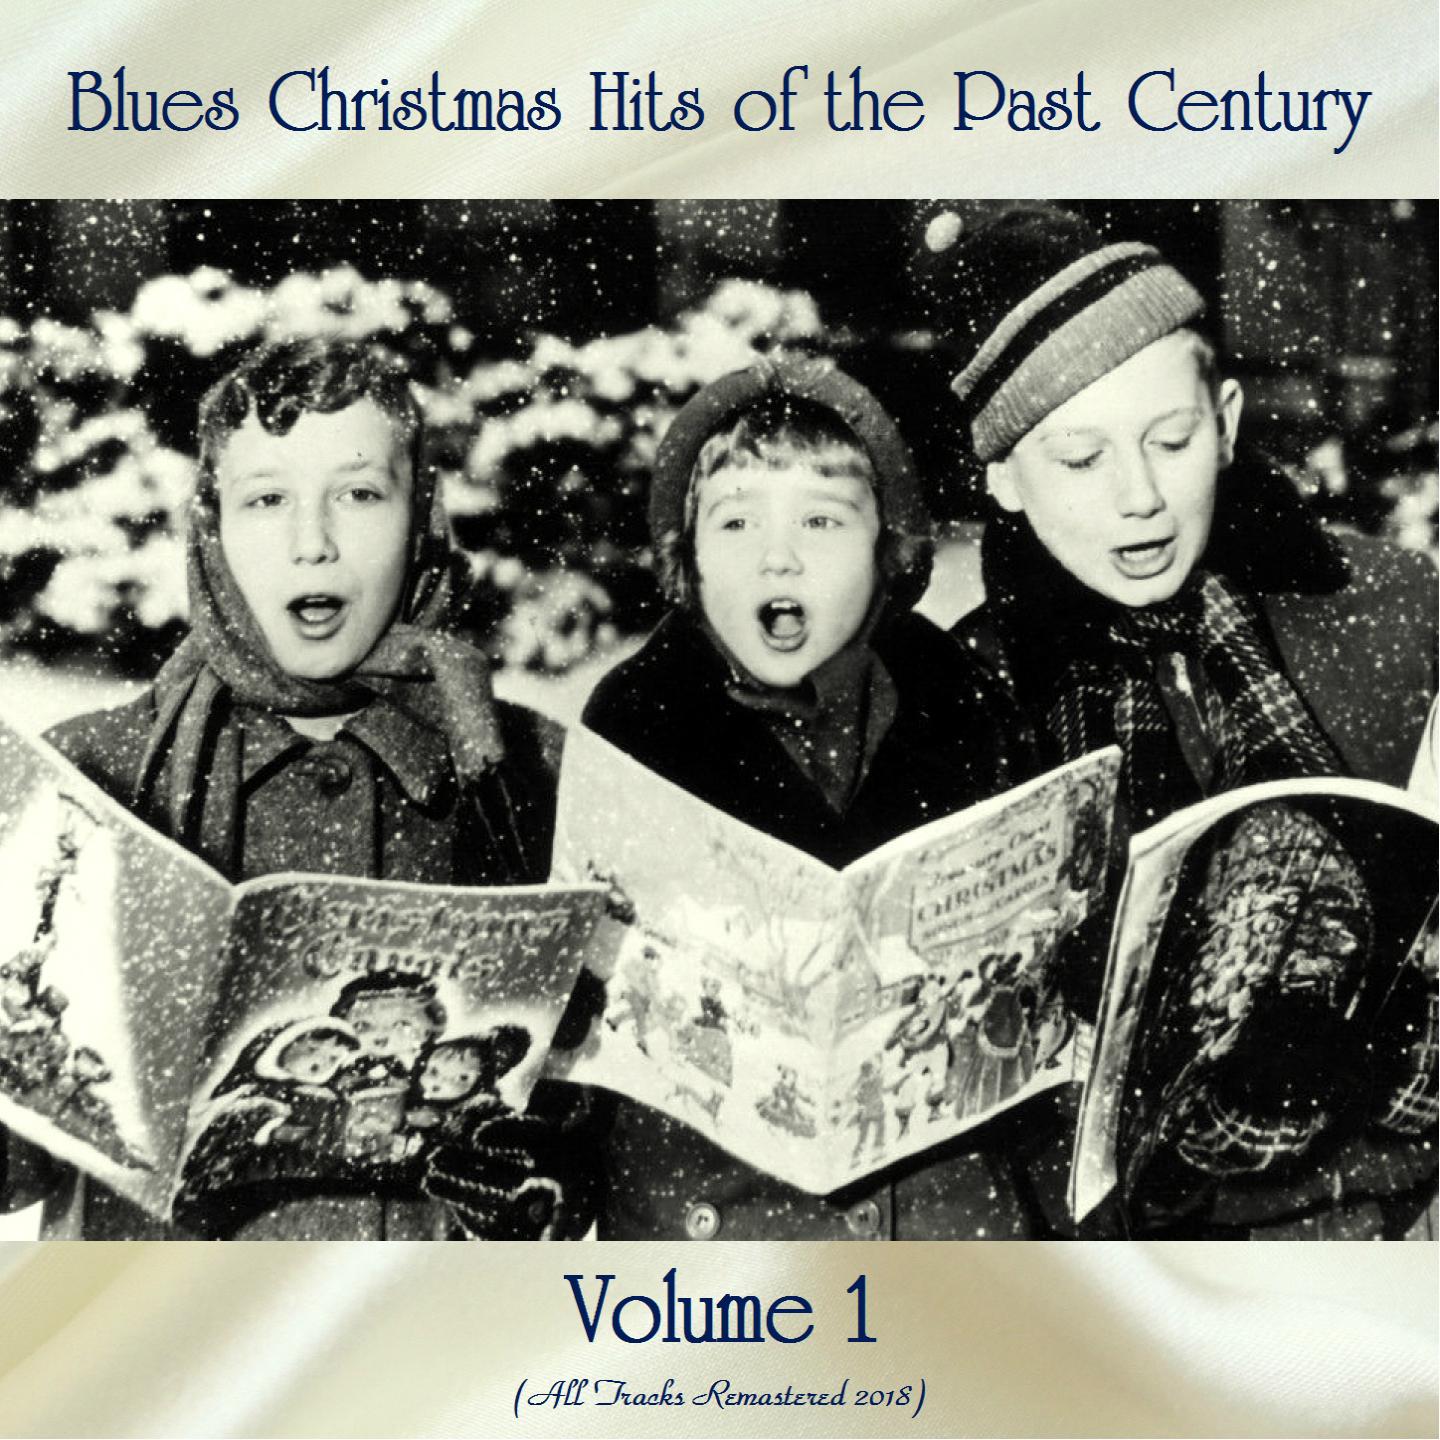 Blues Christmas Hits of the Past Century Vol. 1 (All Tracks Remastered 2018)